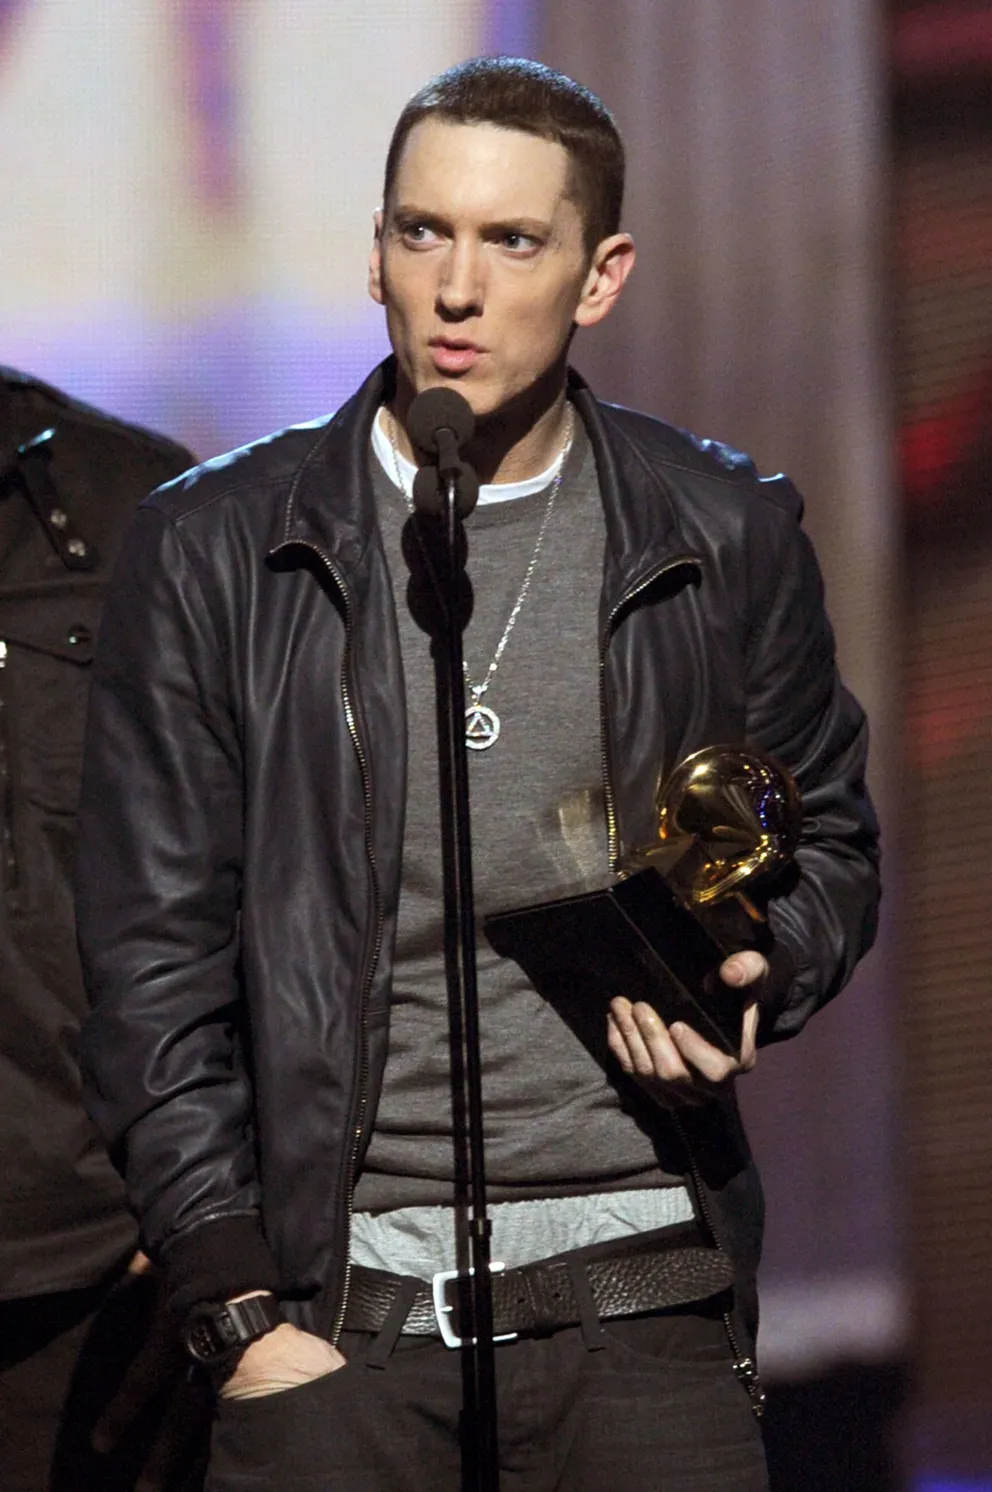 Eminem during The 53rd Annual GRAMMY Awards held at Staples Center on February 13, 2011 | Photo: Getty Images